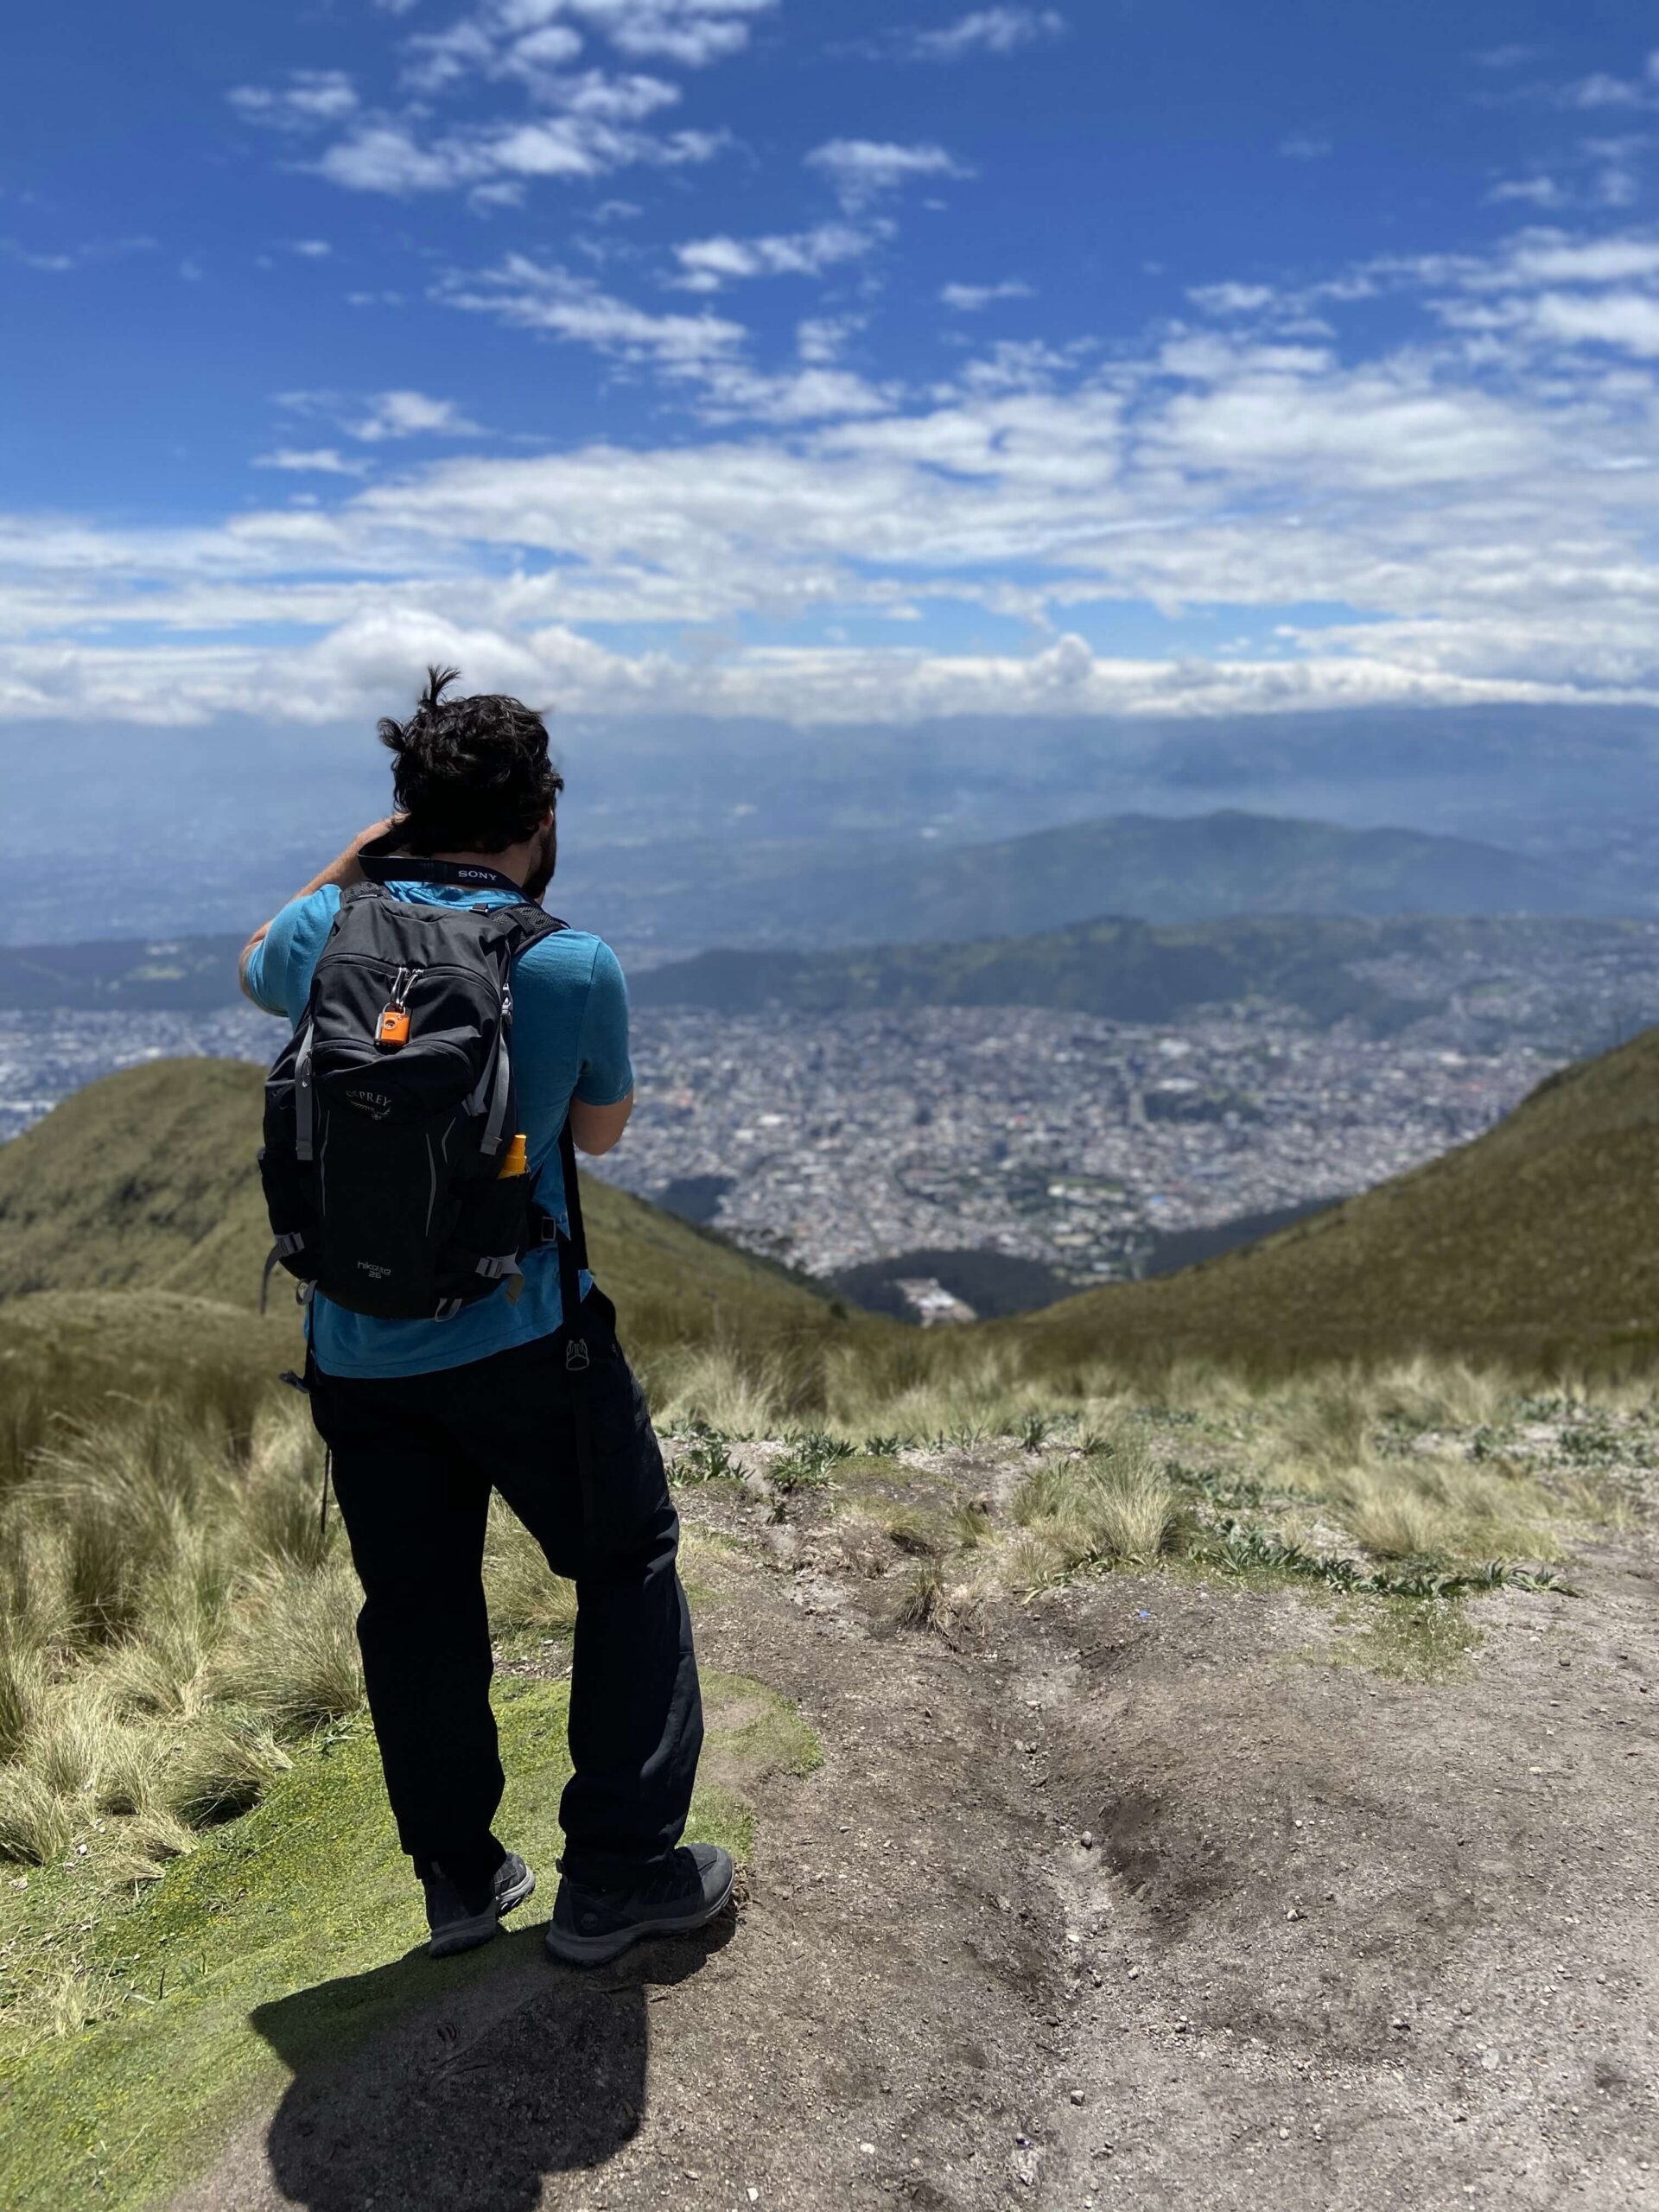 Alex photographing the view of Quito below.